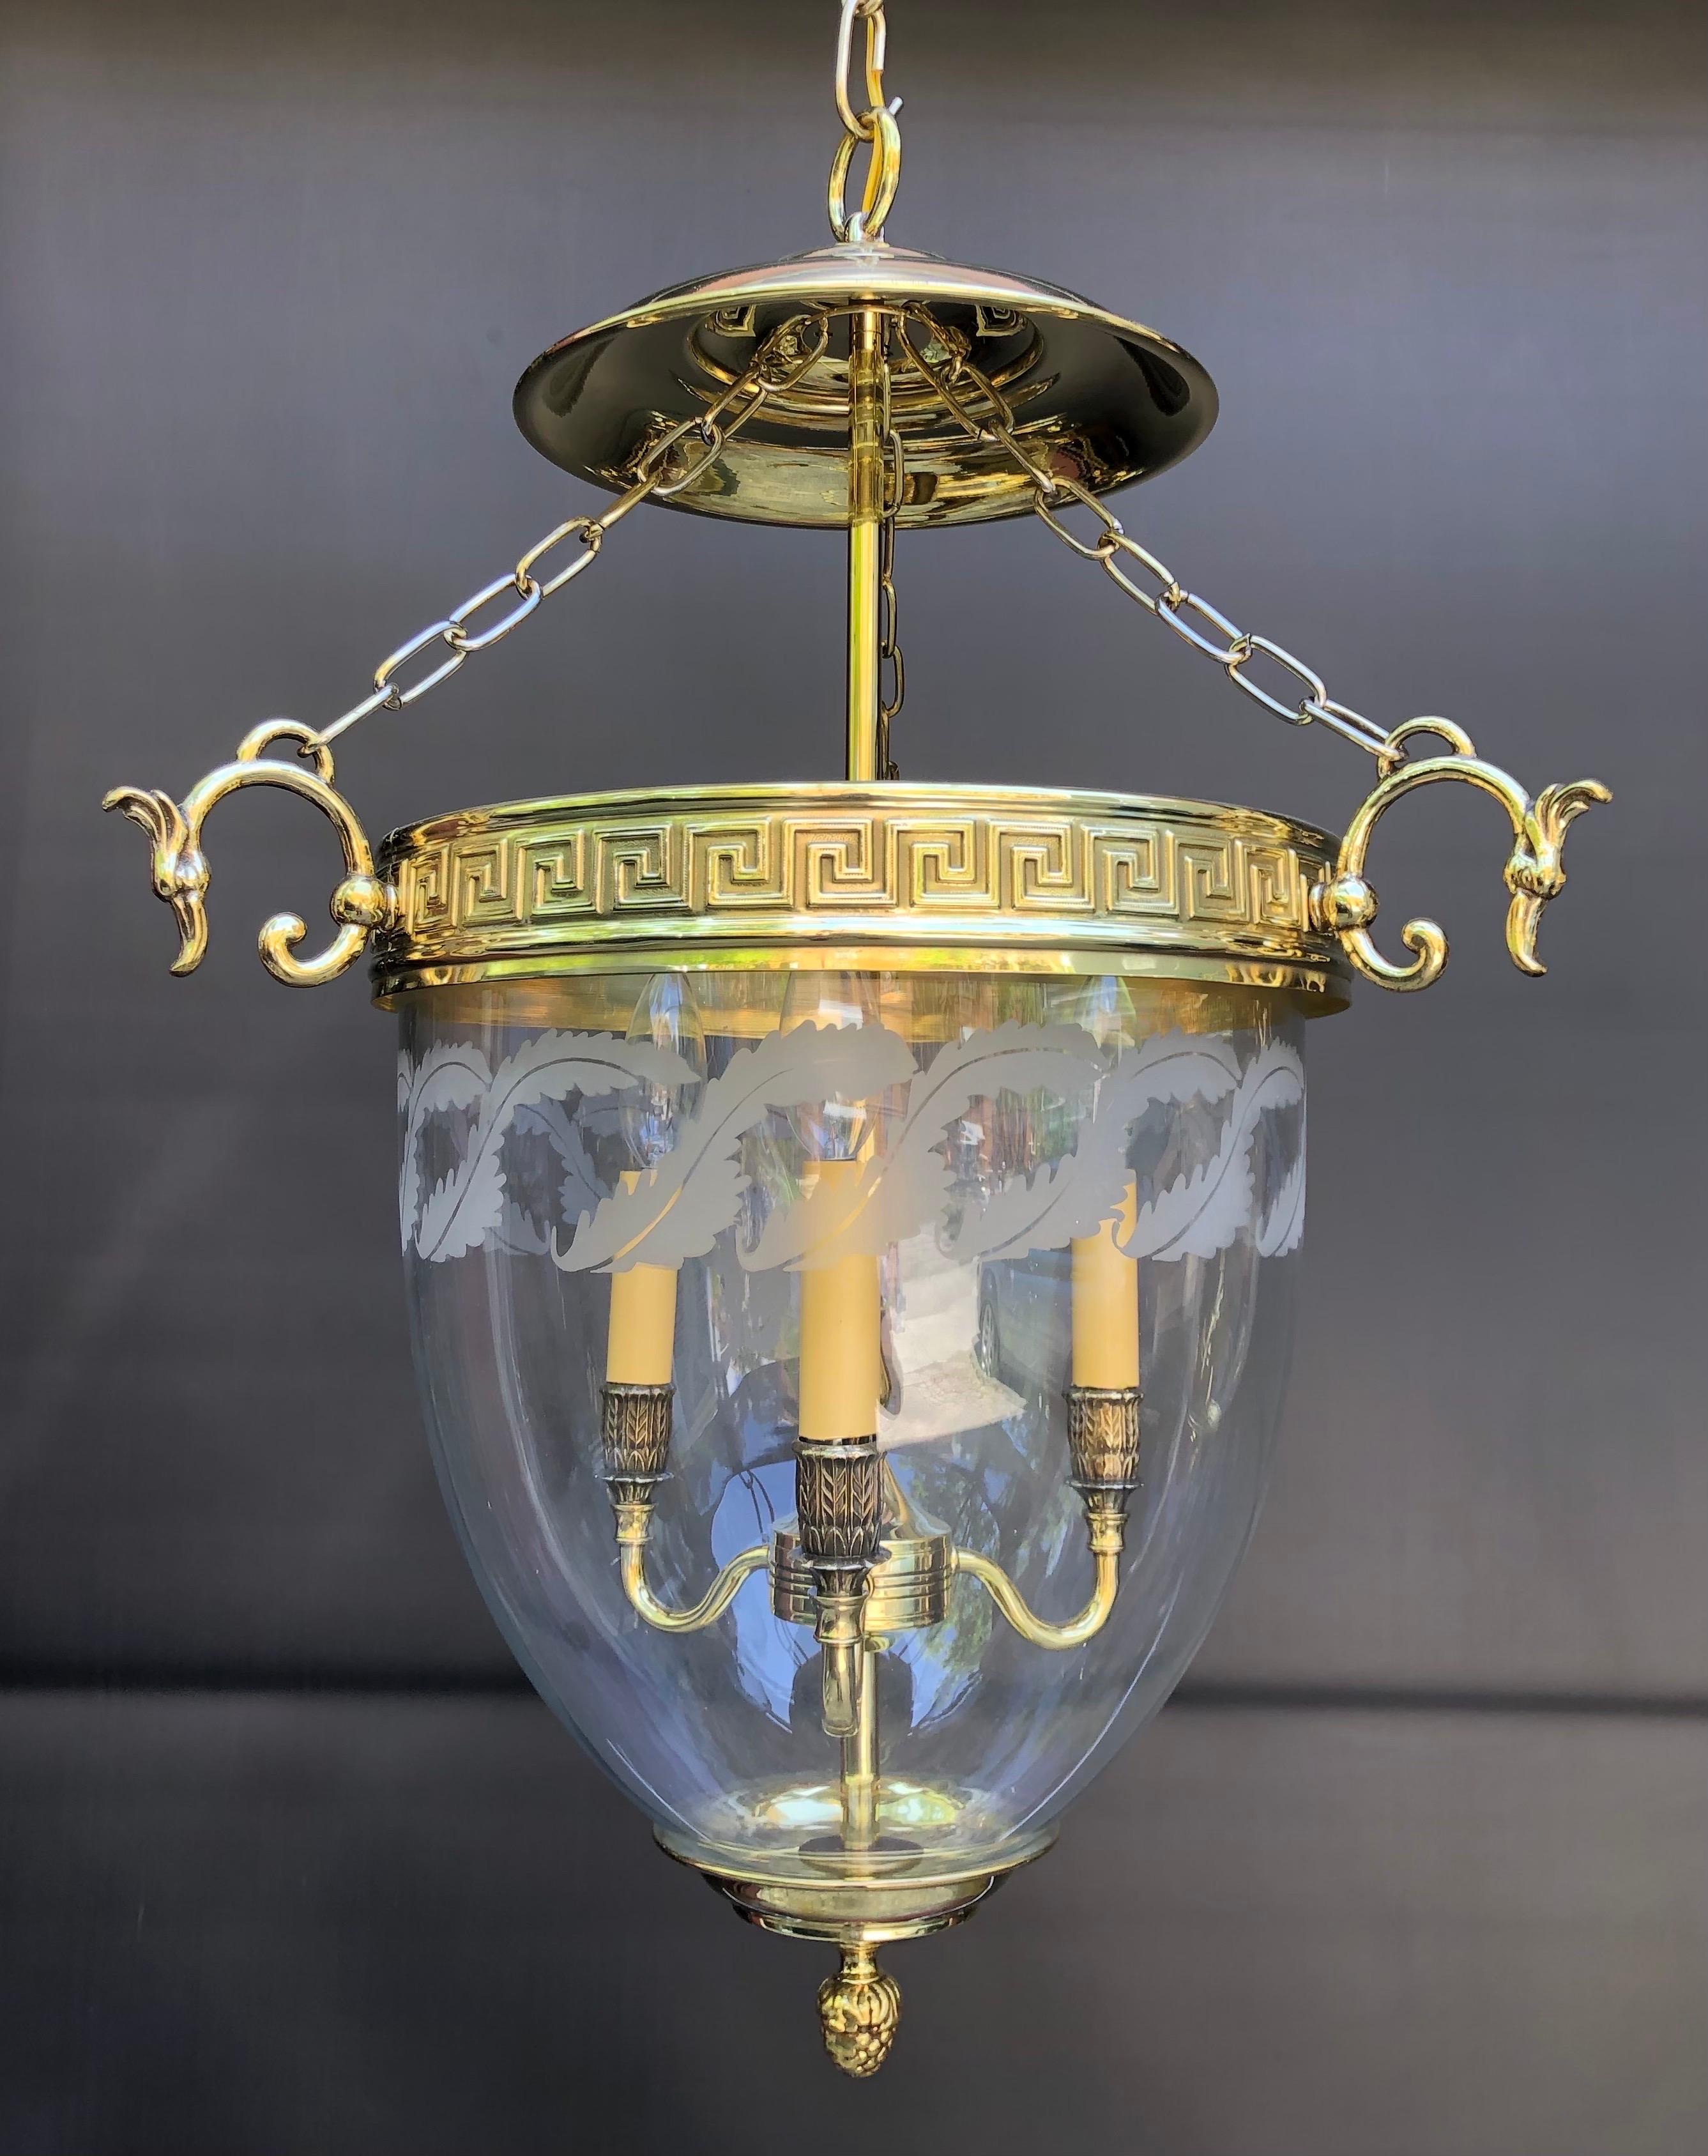 Hollywood Regency mid 20th century bell jar lantern. This high style Bell Lantern has a brass smoke bells with 3 brass chains descending to the Greek Key Band. The chains are hooked to the three Ho Ho Bird scrolled arms. The Hand Blown Glass Bell